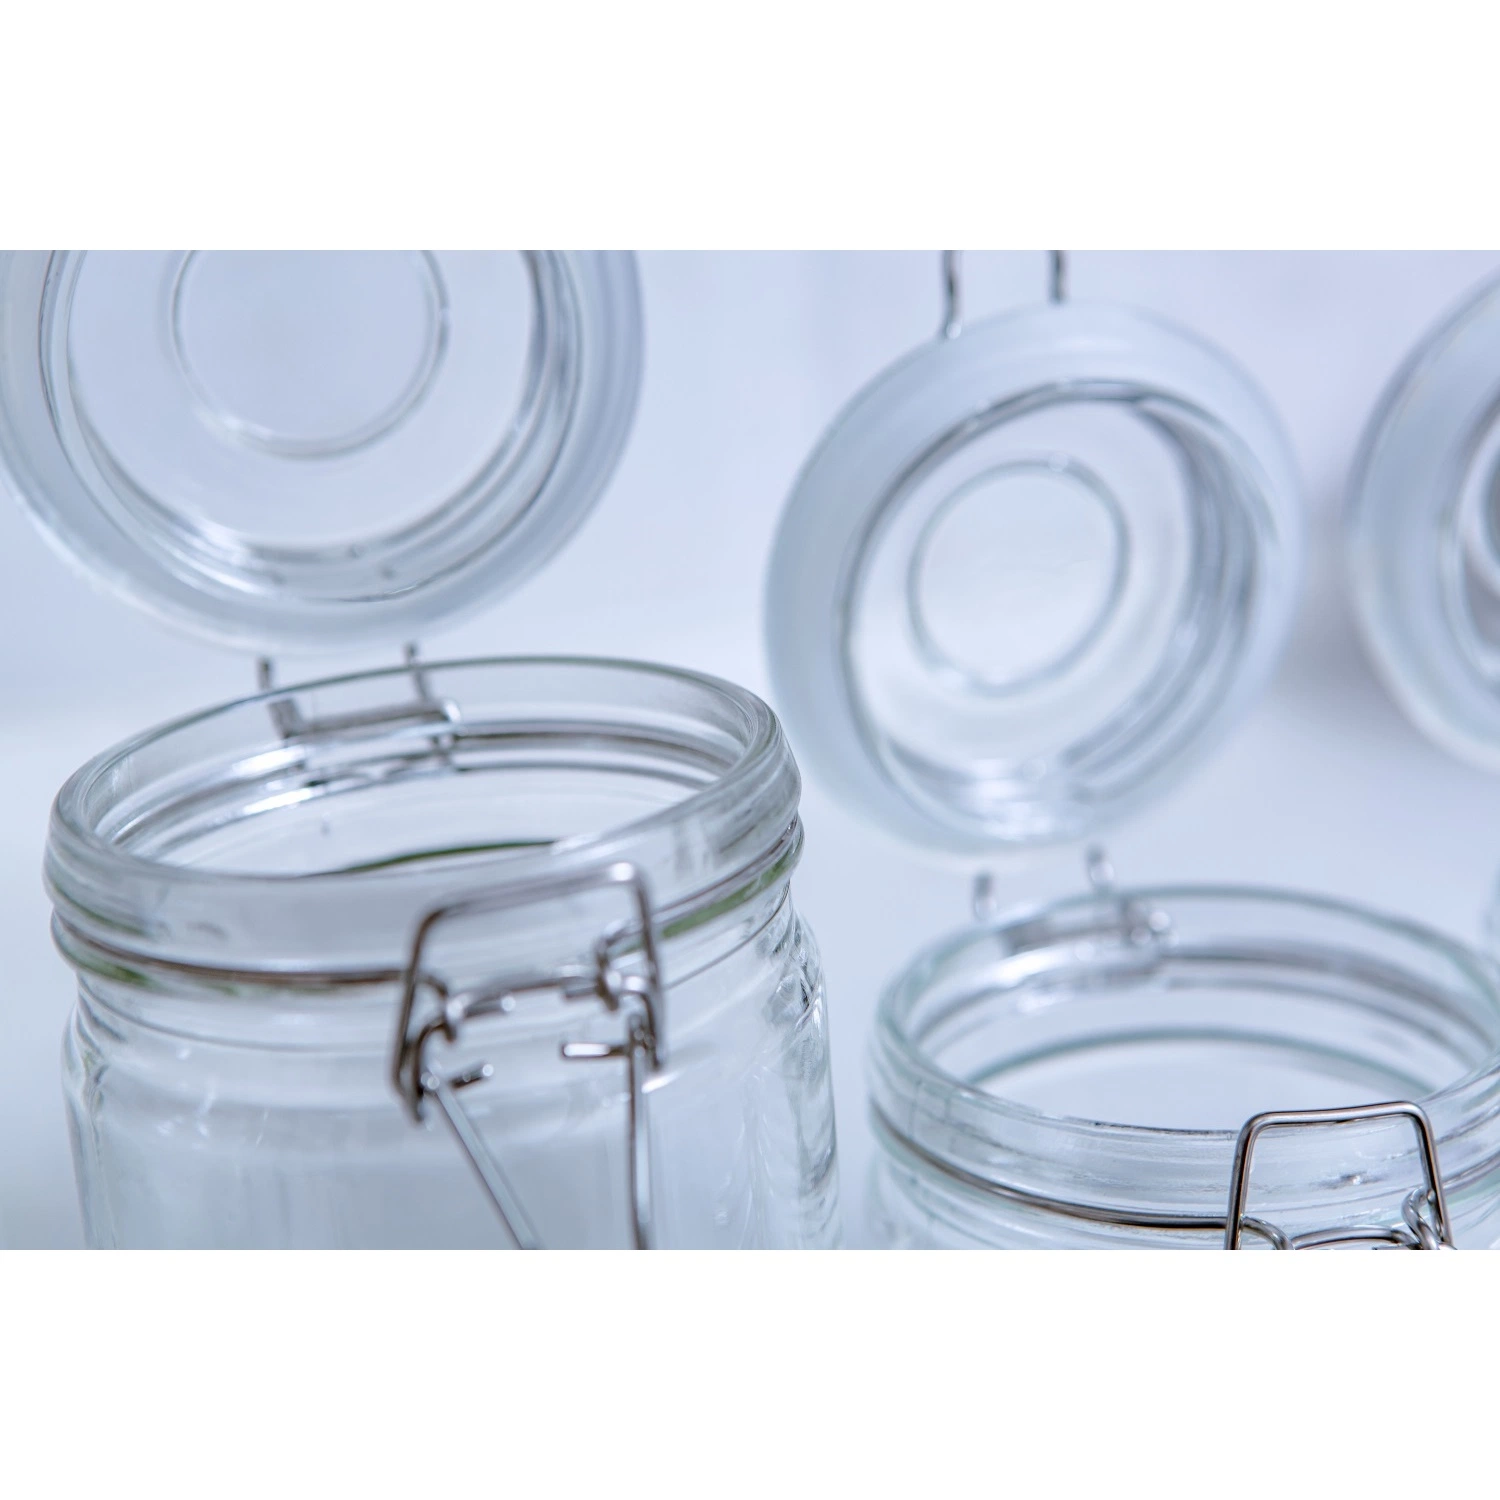 Wholesale/Supplier Christmas Gift Clear Large Candy Biscuit Glass Storage Jar Set with Decorative Ceramic Lid